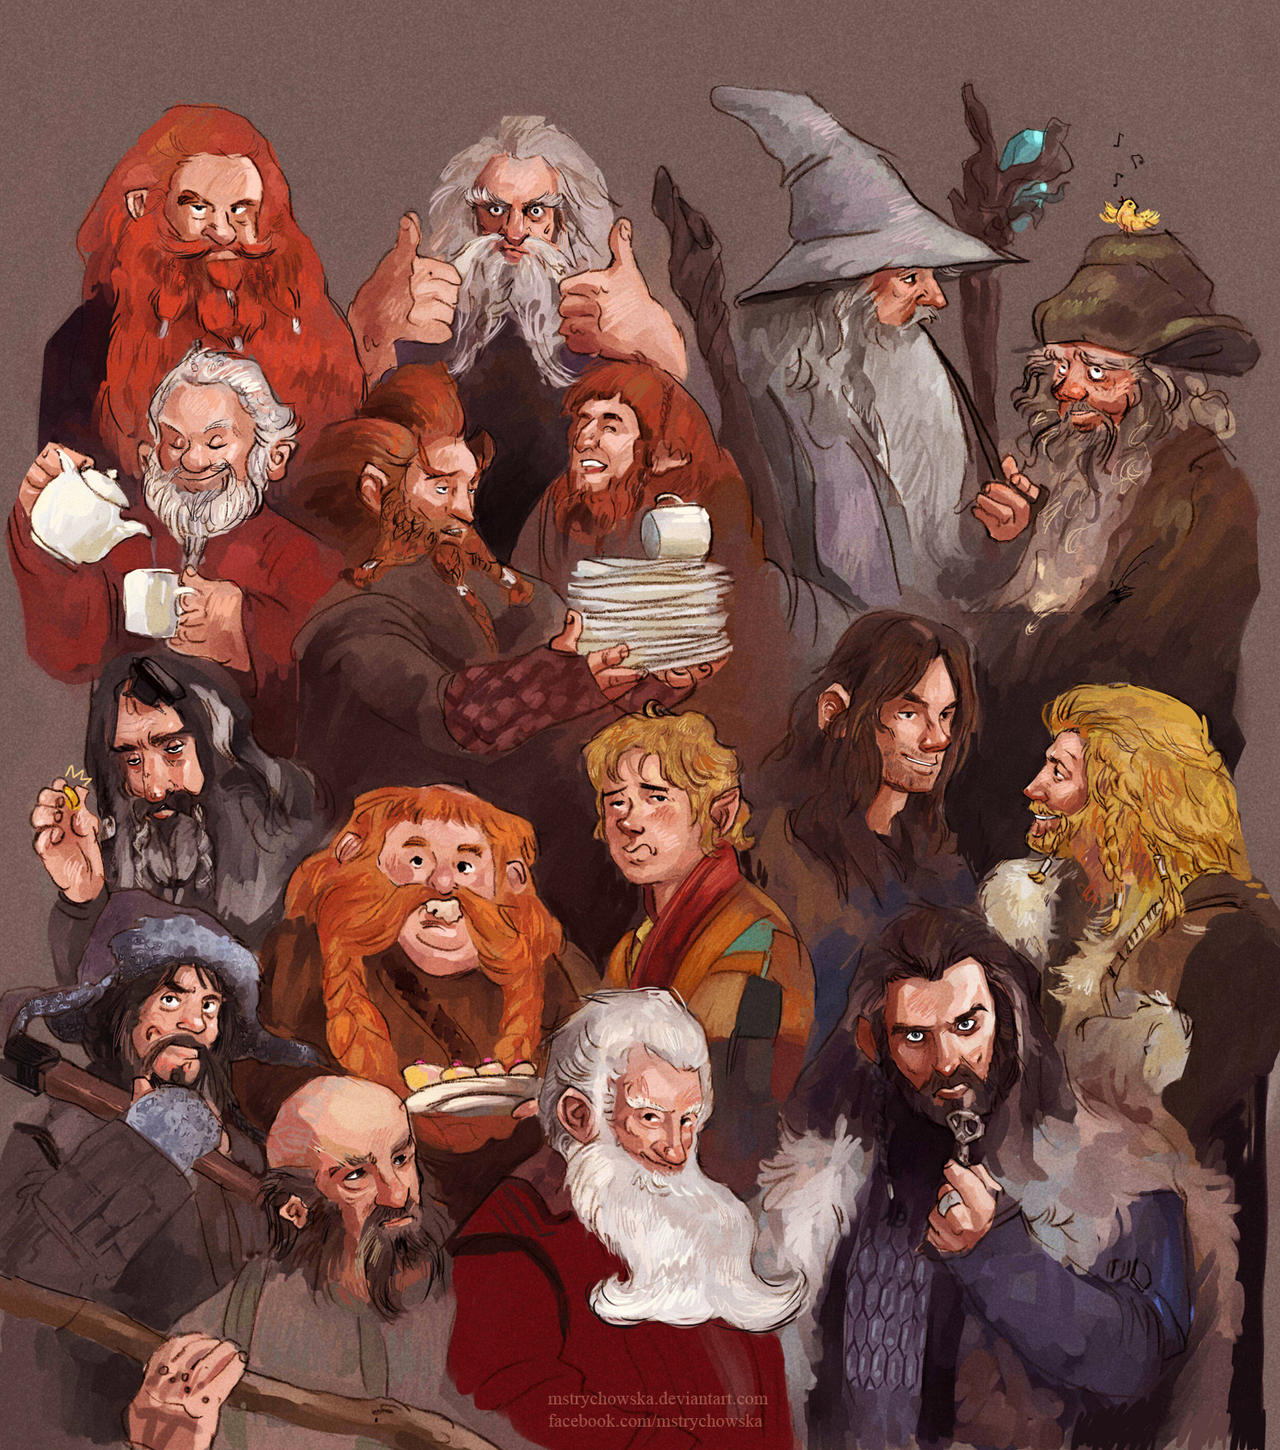 Hobbit Bookmark - Lord of the rings by cristell15 on DeviantArt